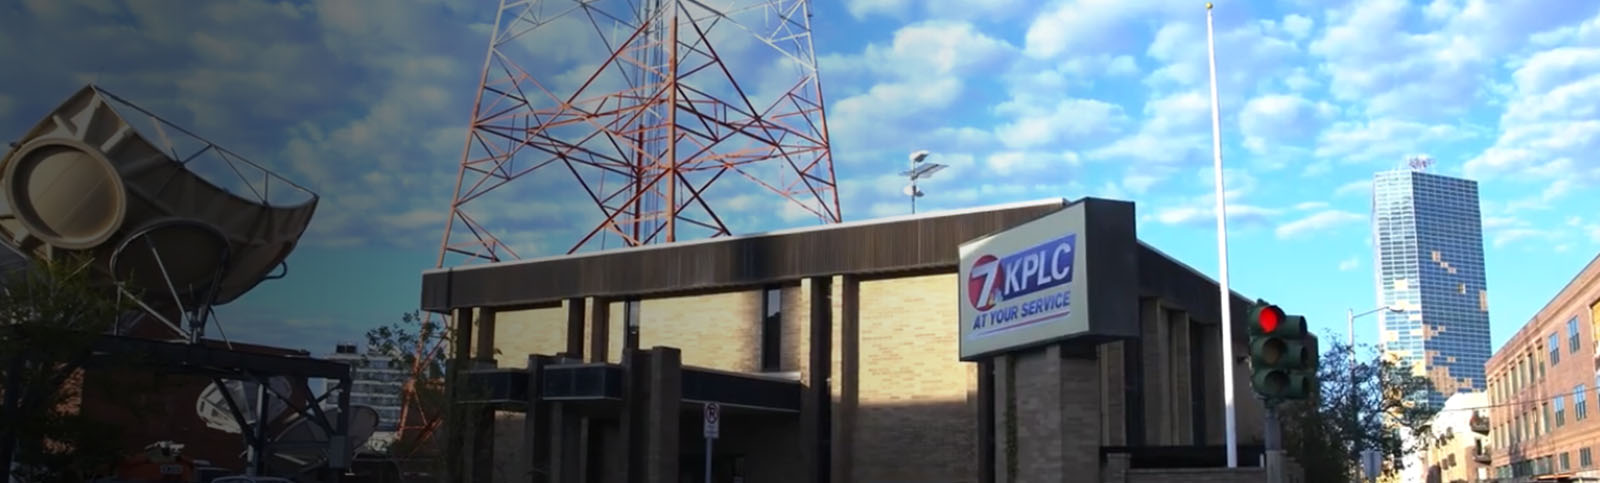 The KPLC-TV station and tower in Lake Charles, Louisiana